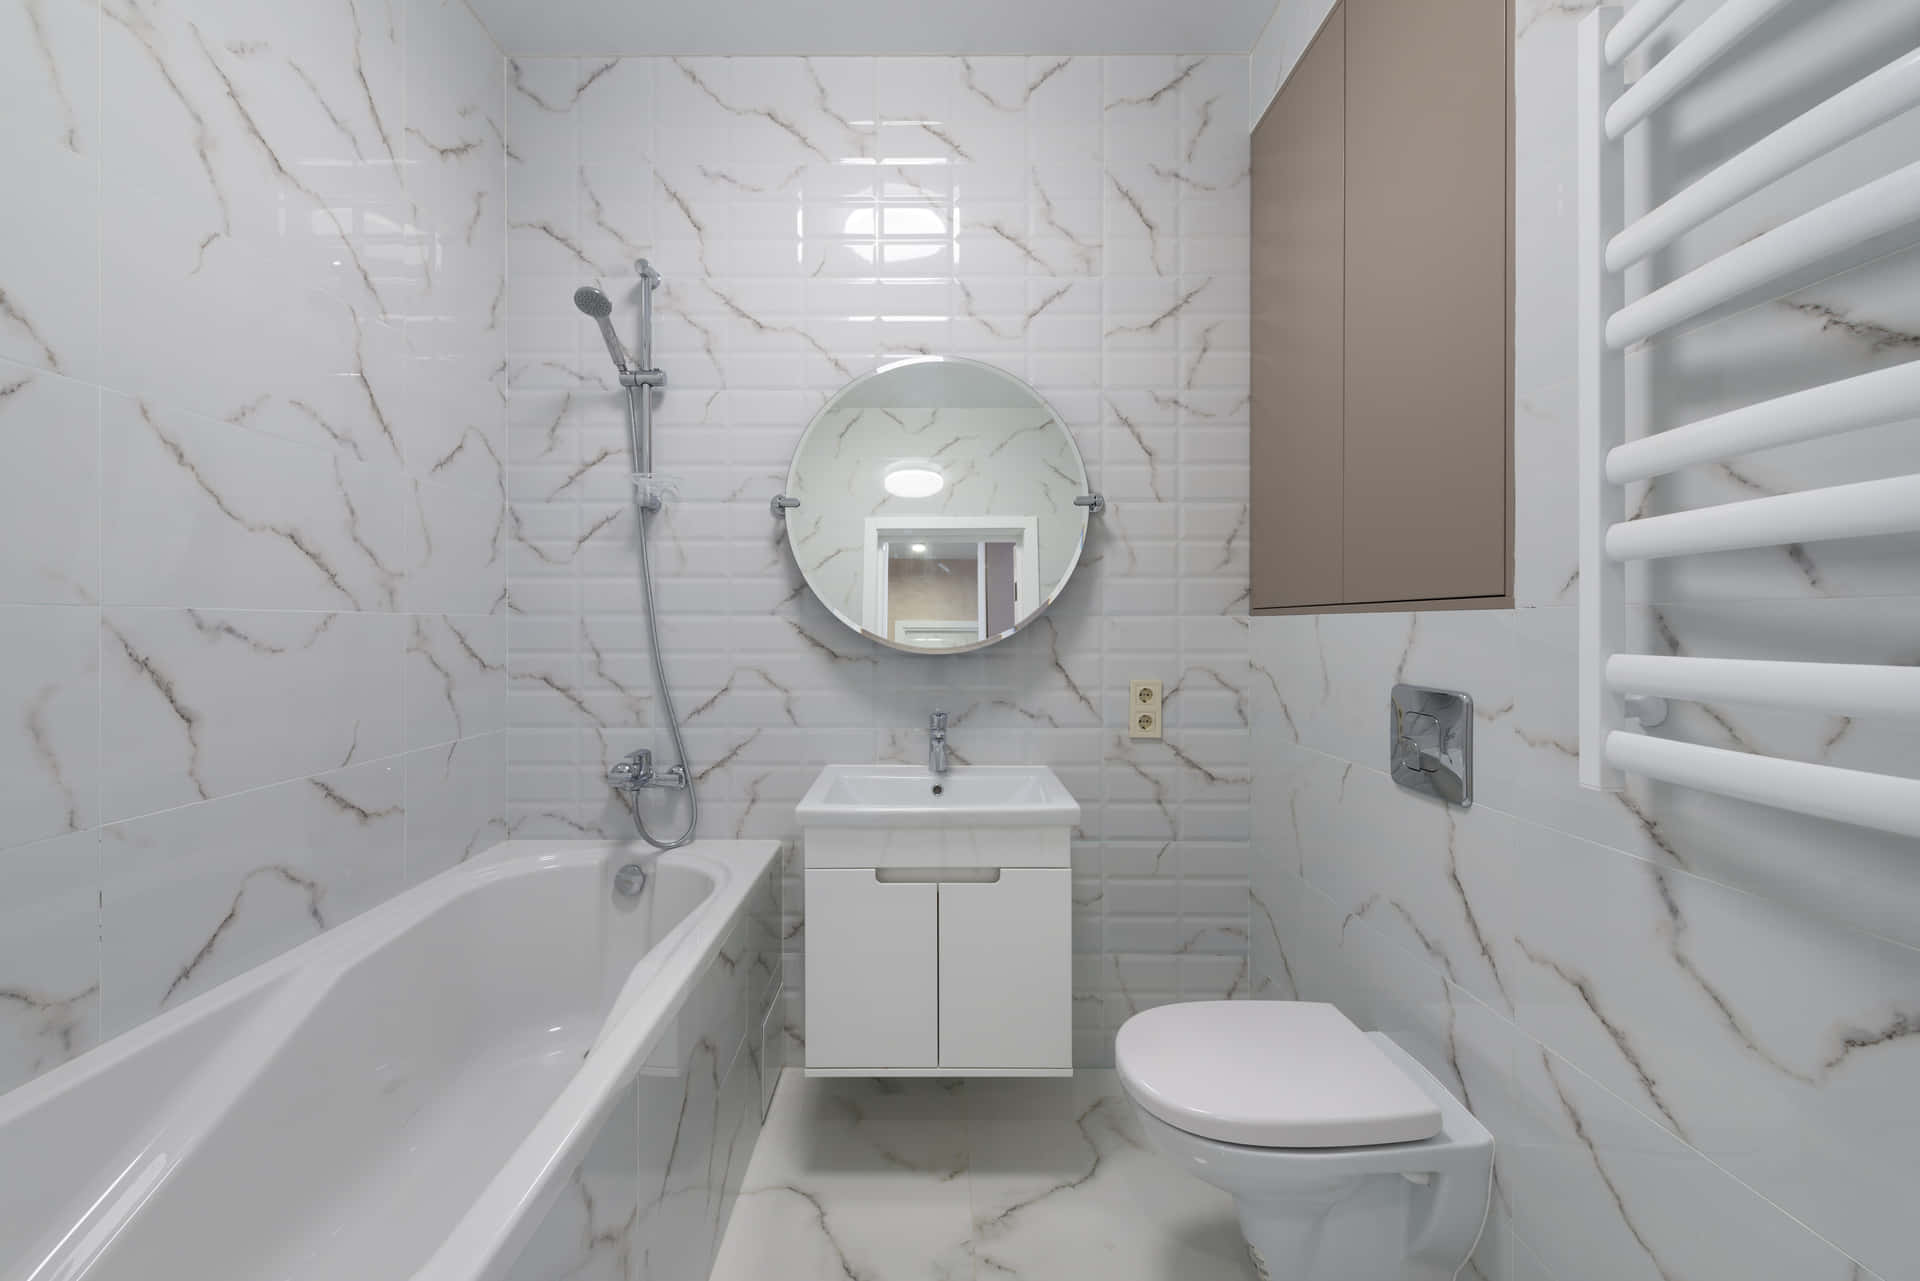 A classic white toilet in a clean and modern bathroom